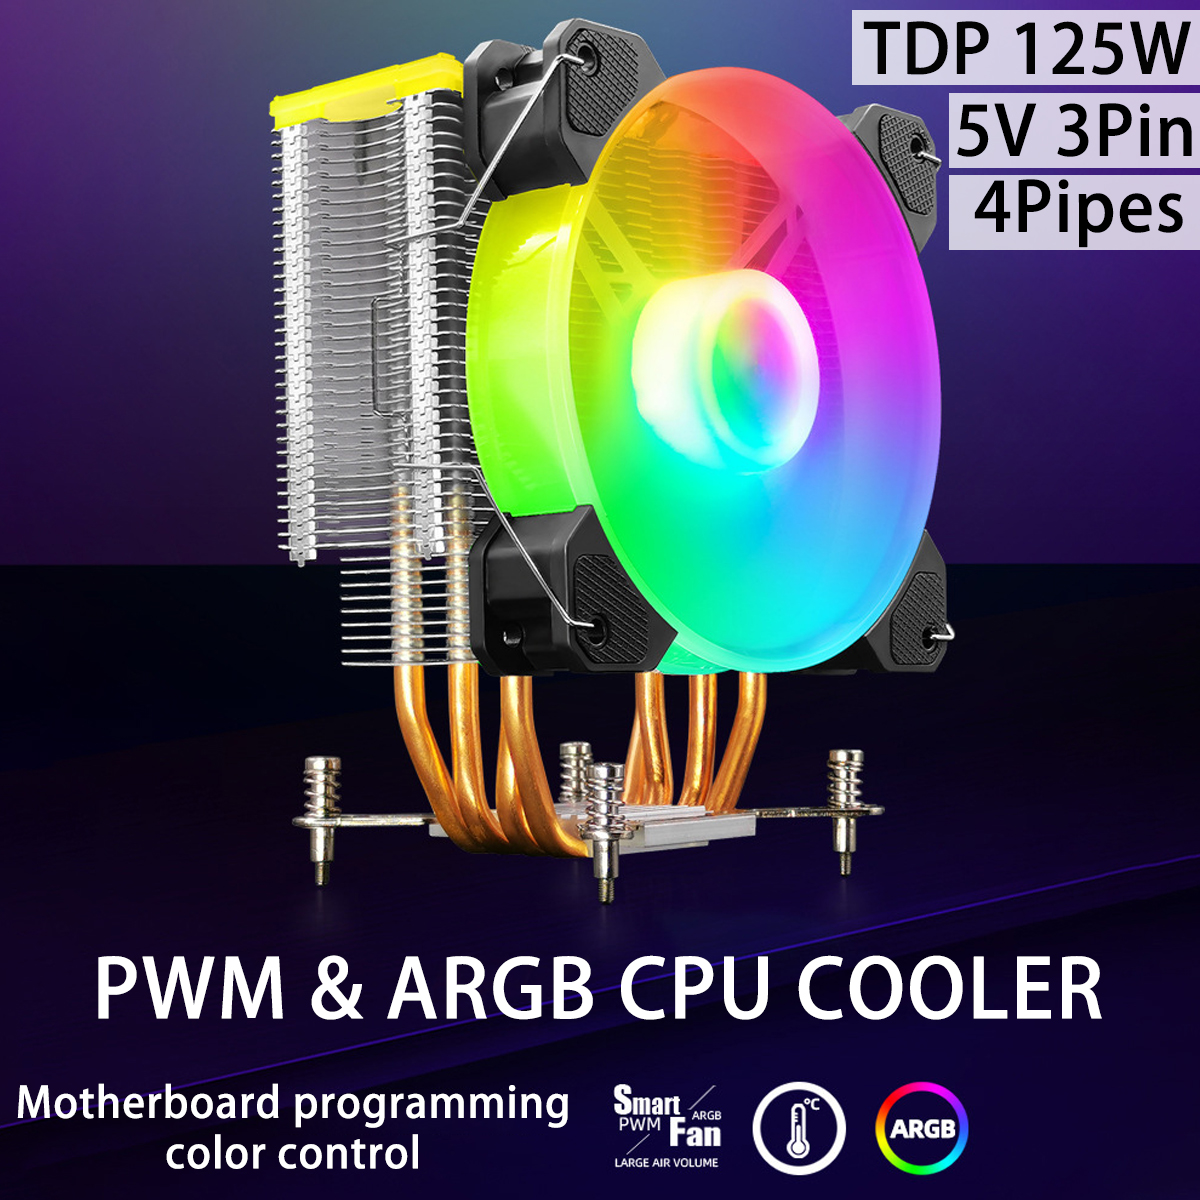 COOLMOON X400 ARGB CPU Cooler 4 Heat Pipes 5V 3Pin TDP 125W For Intel/AMD